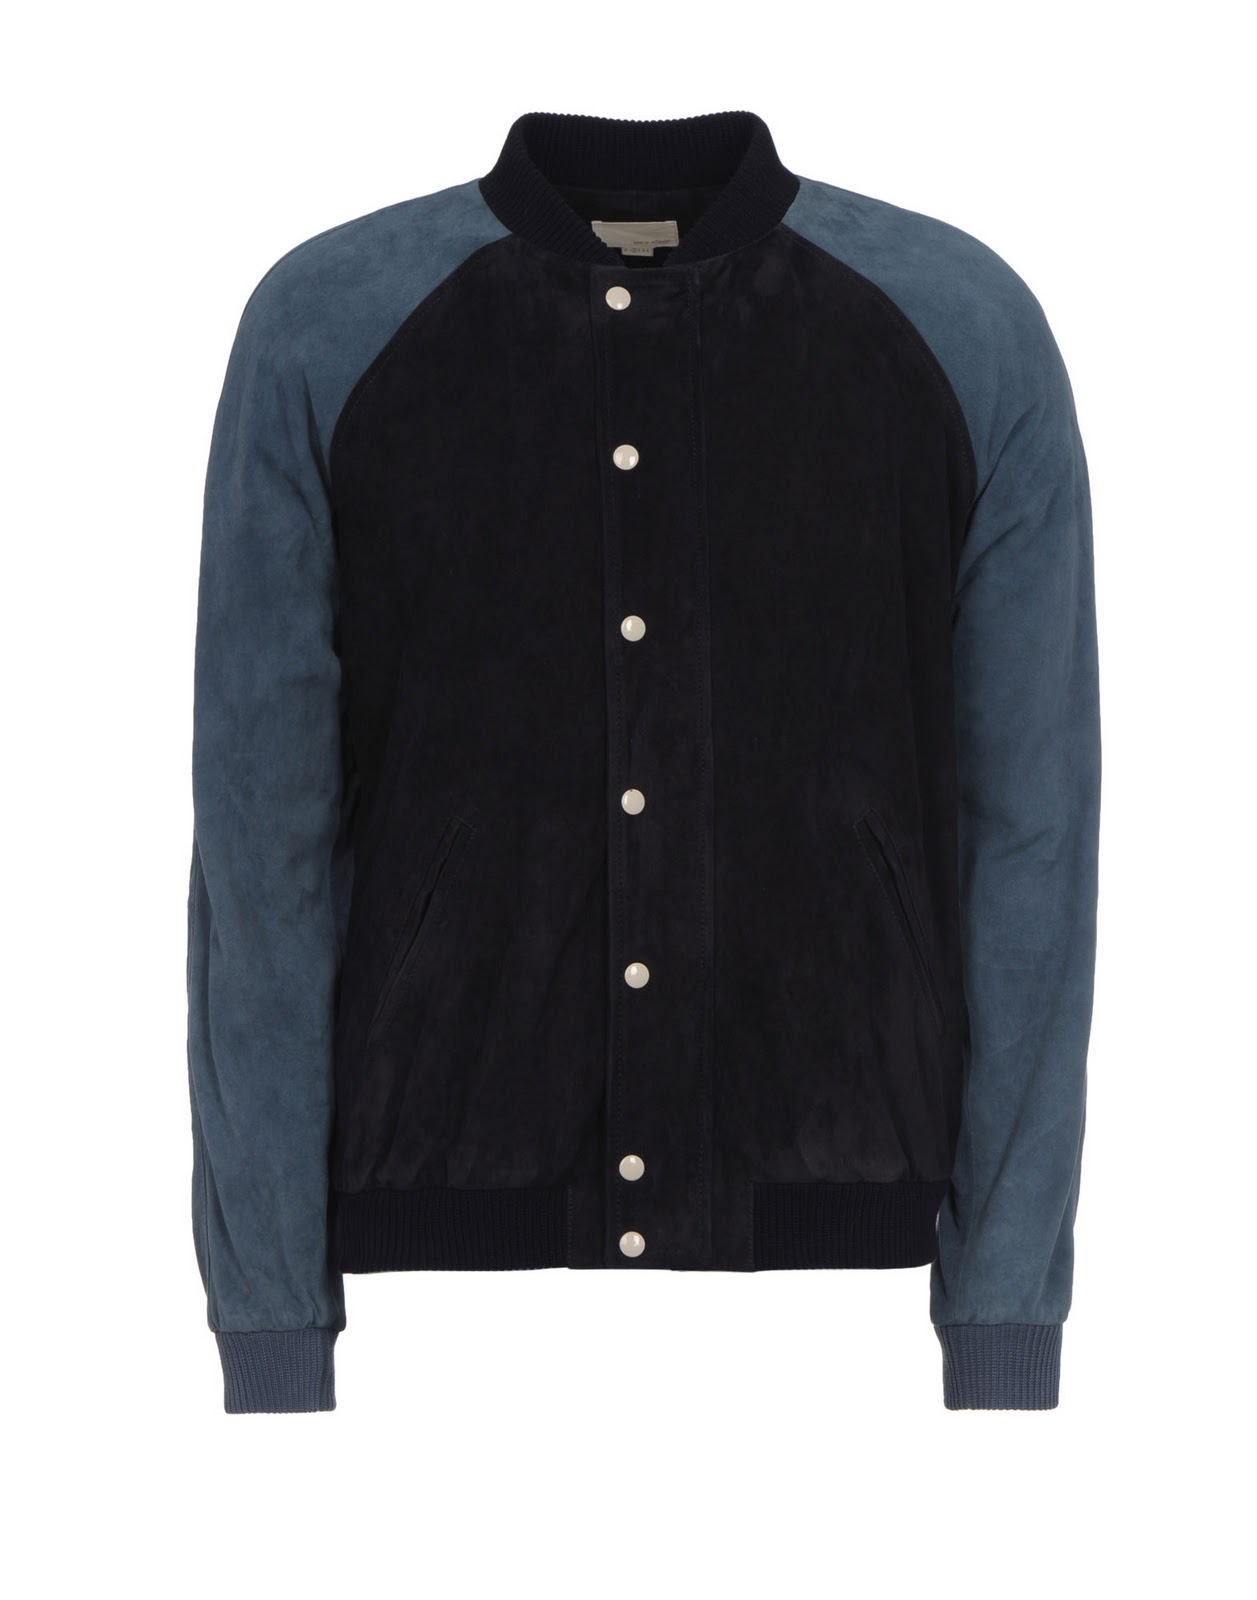 BAND-A-HOLICS: BAND OF OUTSIDERS Classic Suede Baseball Jacket SS12